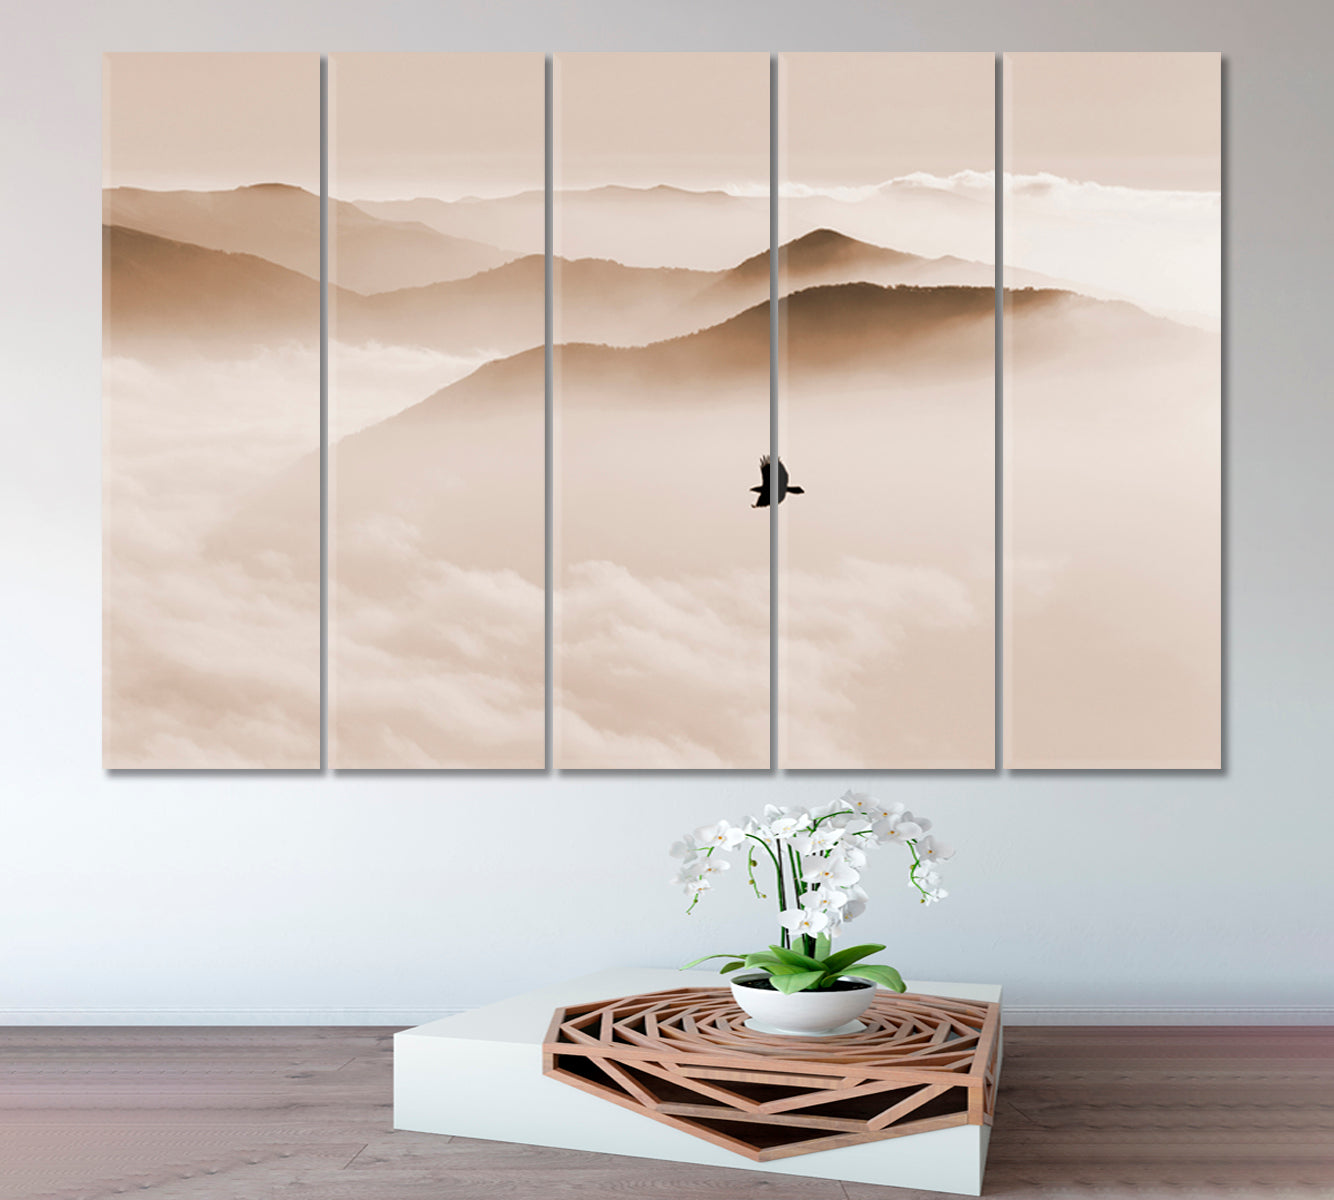 Breathtaking Landscape Sky and Mountain Mist, Silhouettes of Misty Mountains, bird flying, sepia toning Skyscape Canvas Artesty   